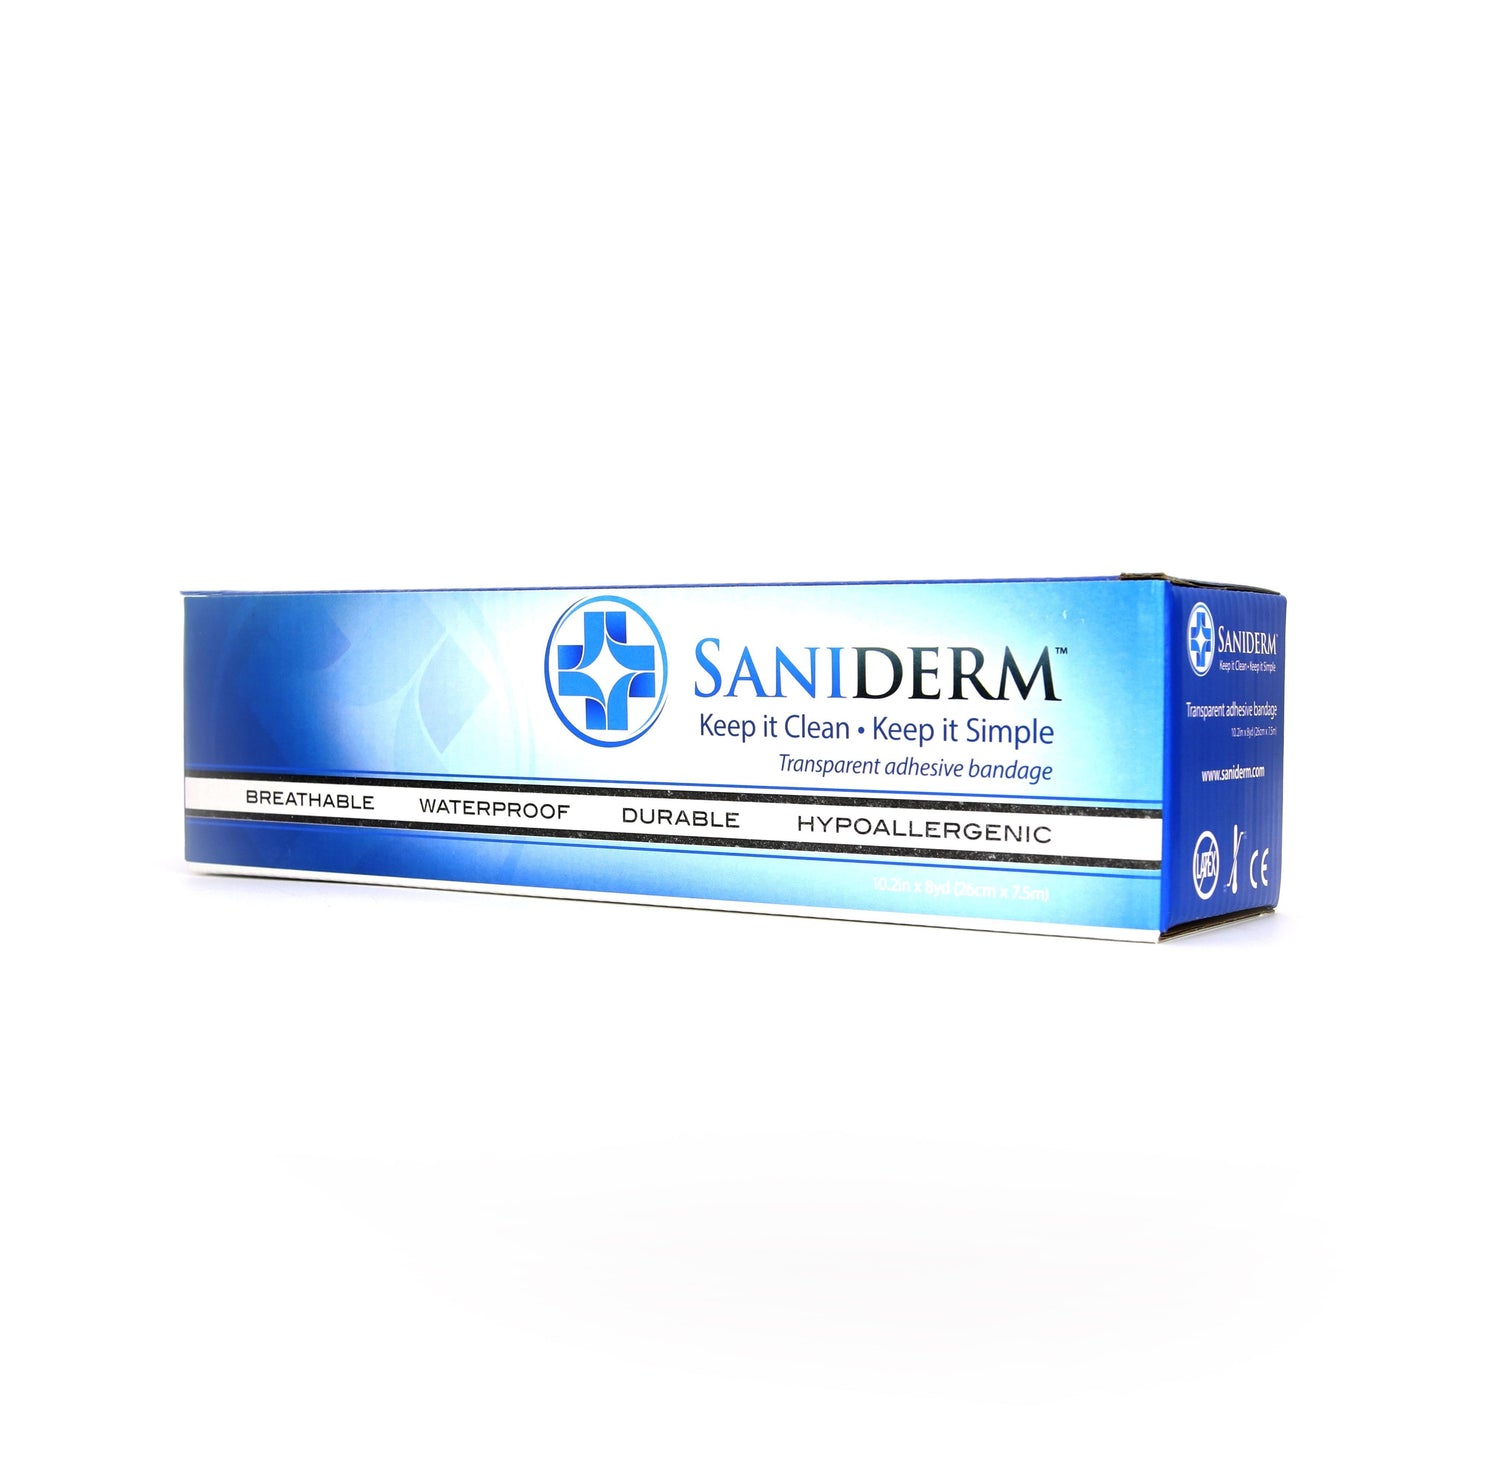 Saniderm Products